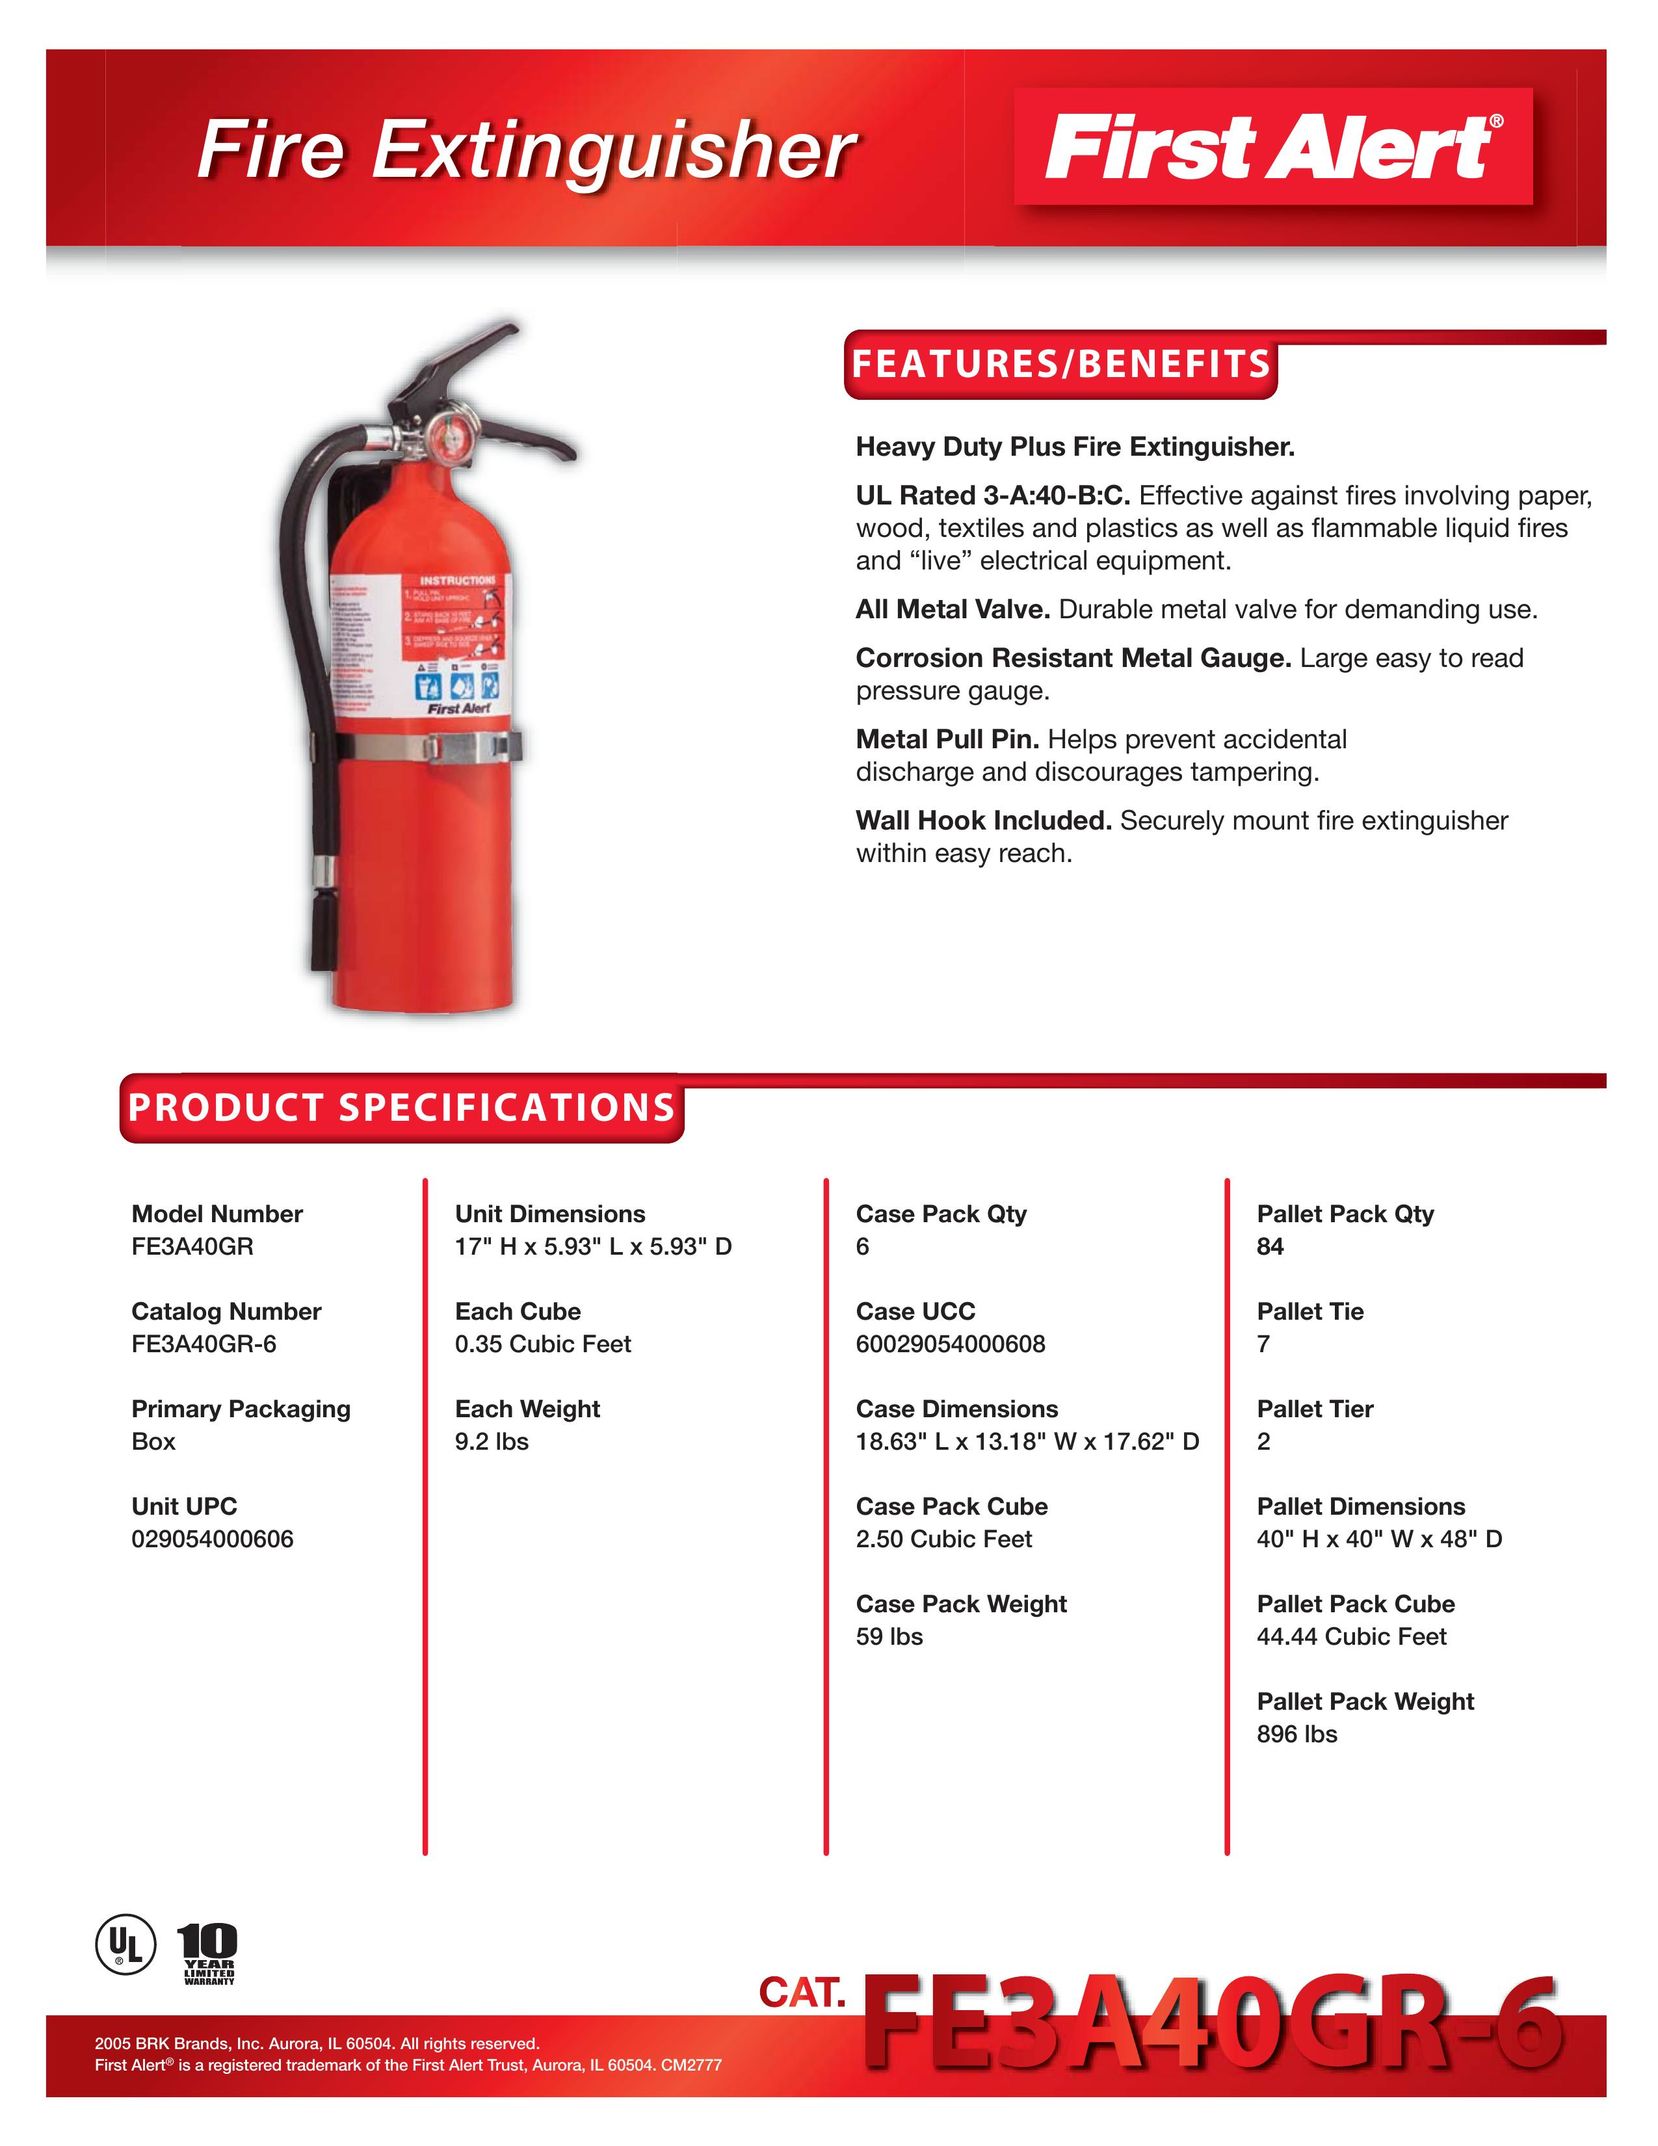 BRK electronic FE3A40GR-6 Fire Extinguisher User Manual